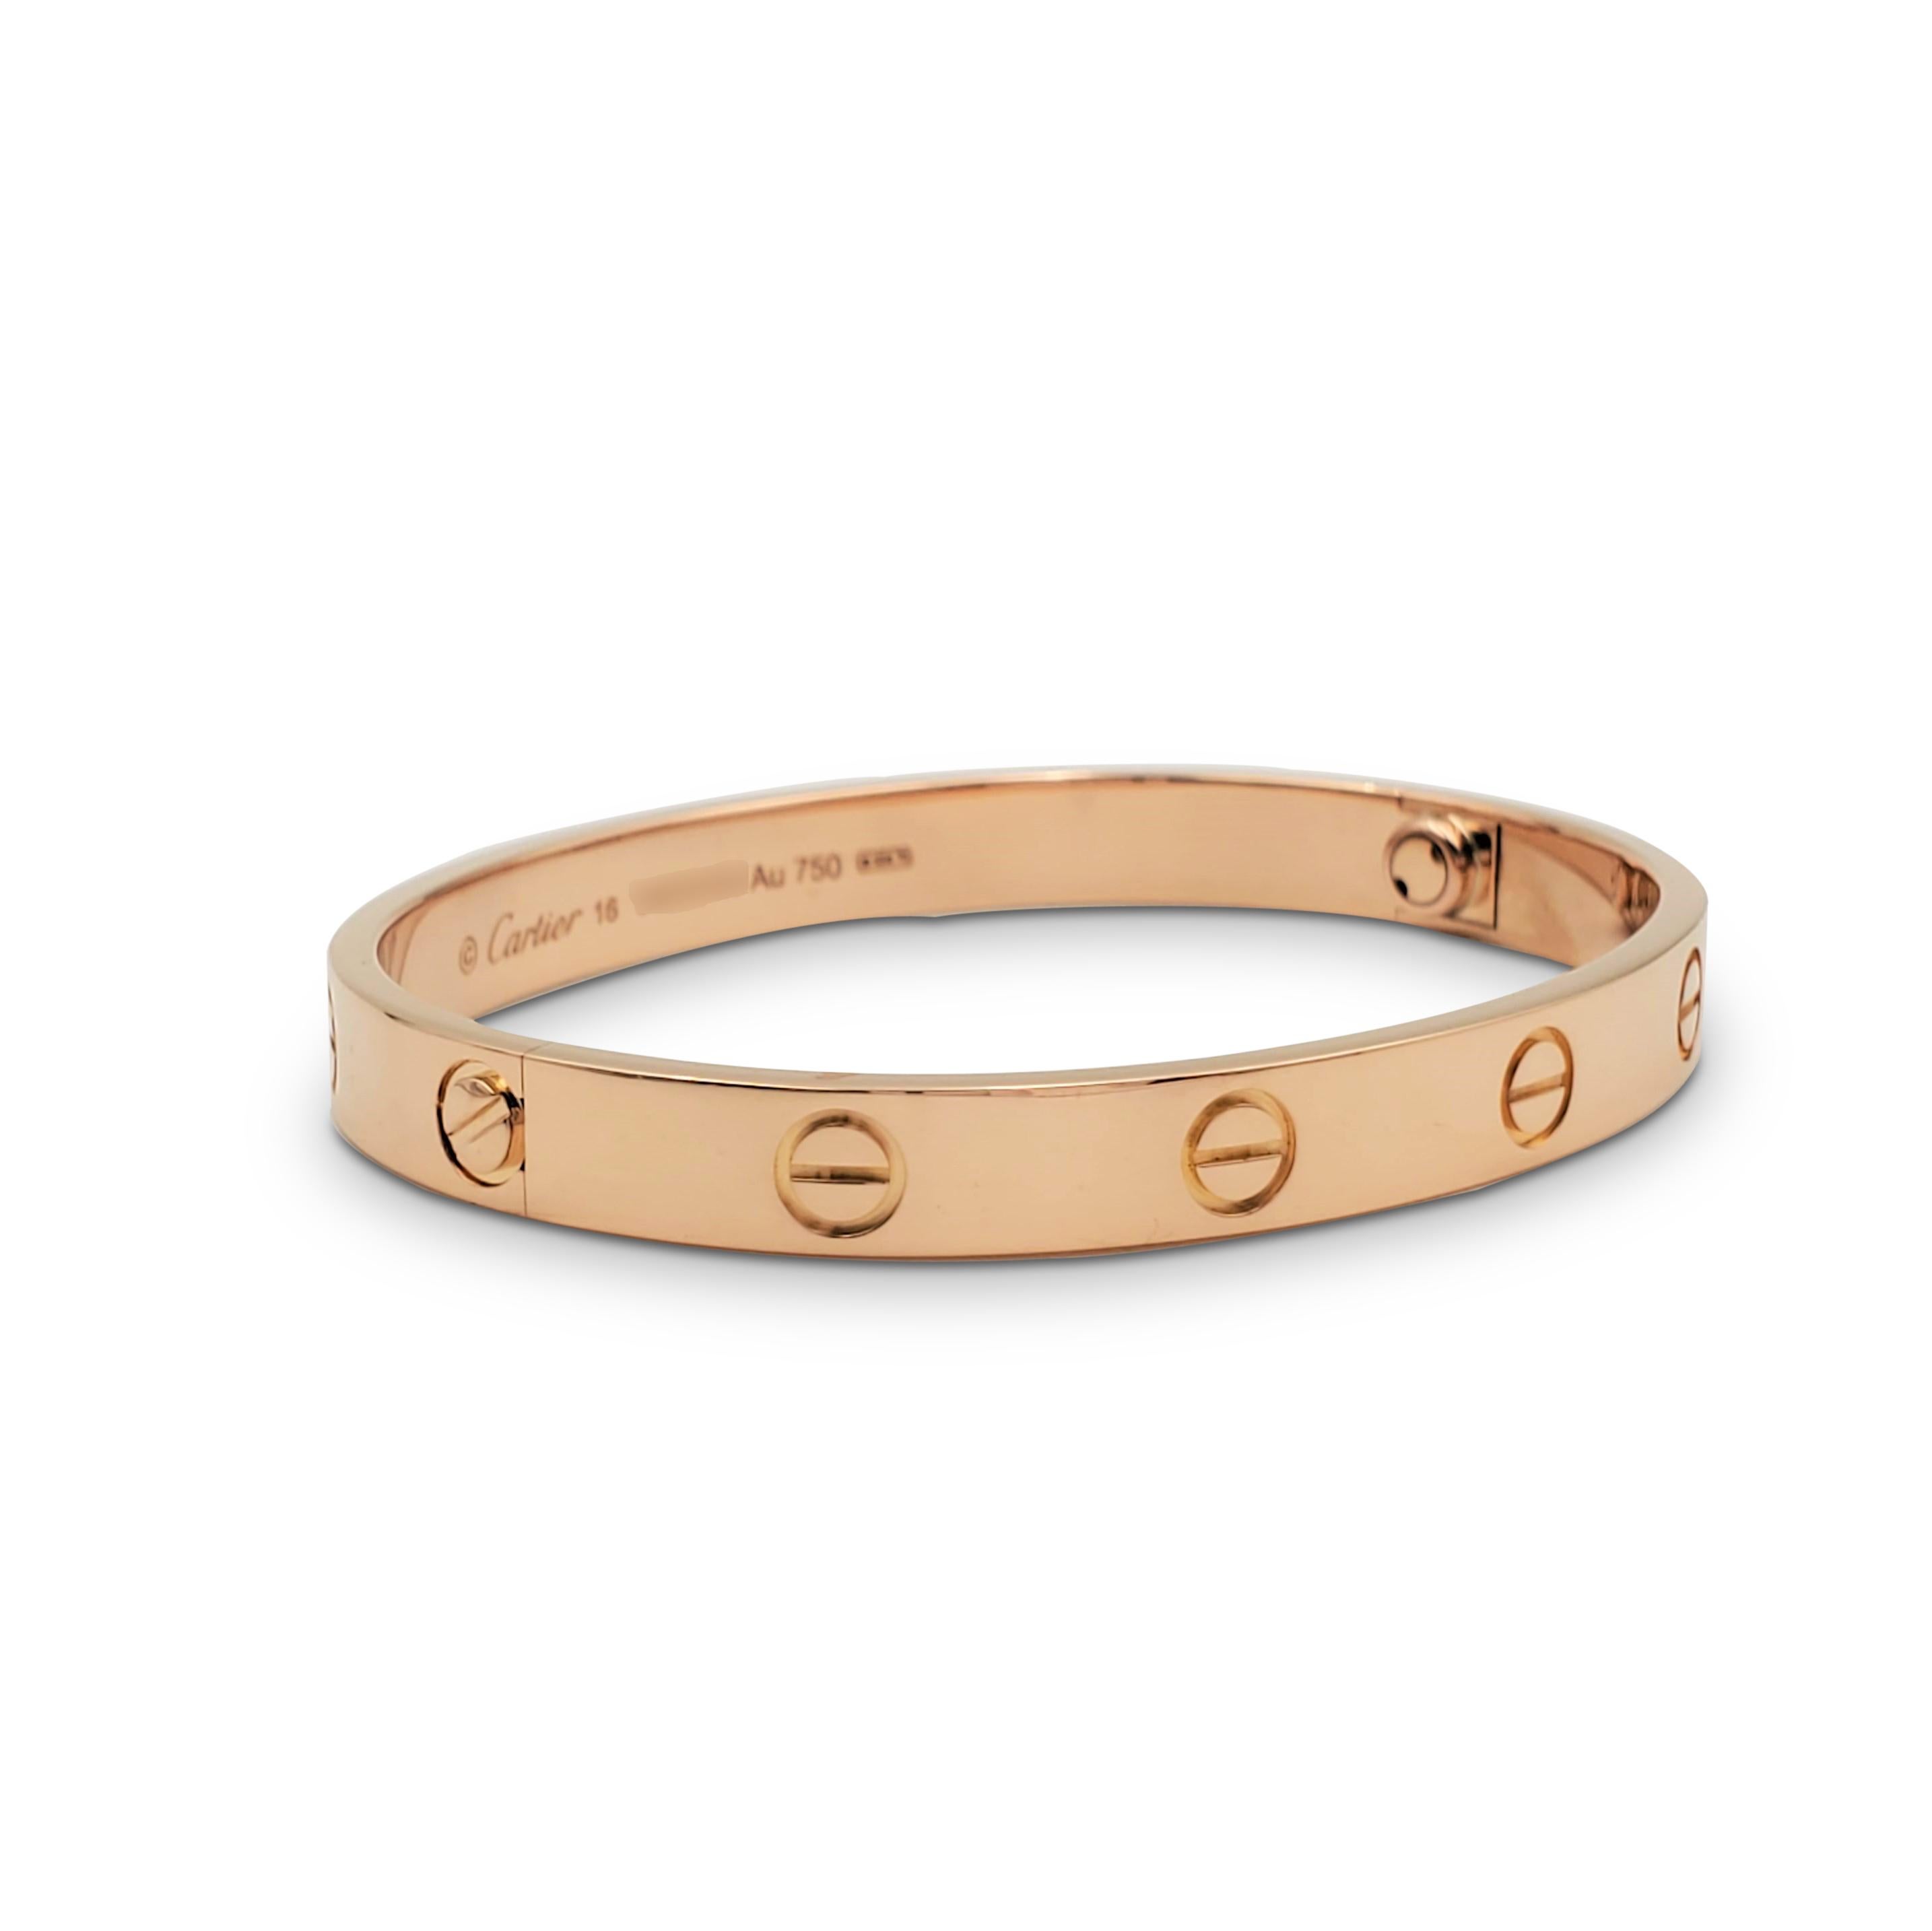 Authentic Cartier 'Love' bracelet crafted in 18 karat rose gold. Size 16. Signed Cartier, 16, Au750, with serial number. The bracelet is presented with the original screwdriver, no box or papers. CIRCA 2010s.

Bracelet Size: 16 (16 cm)
Box: